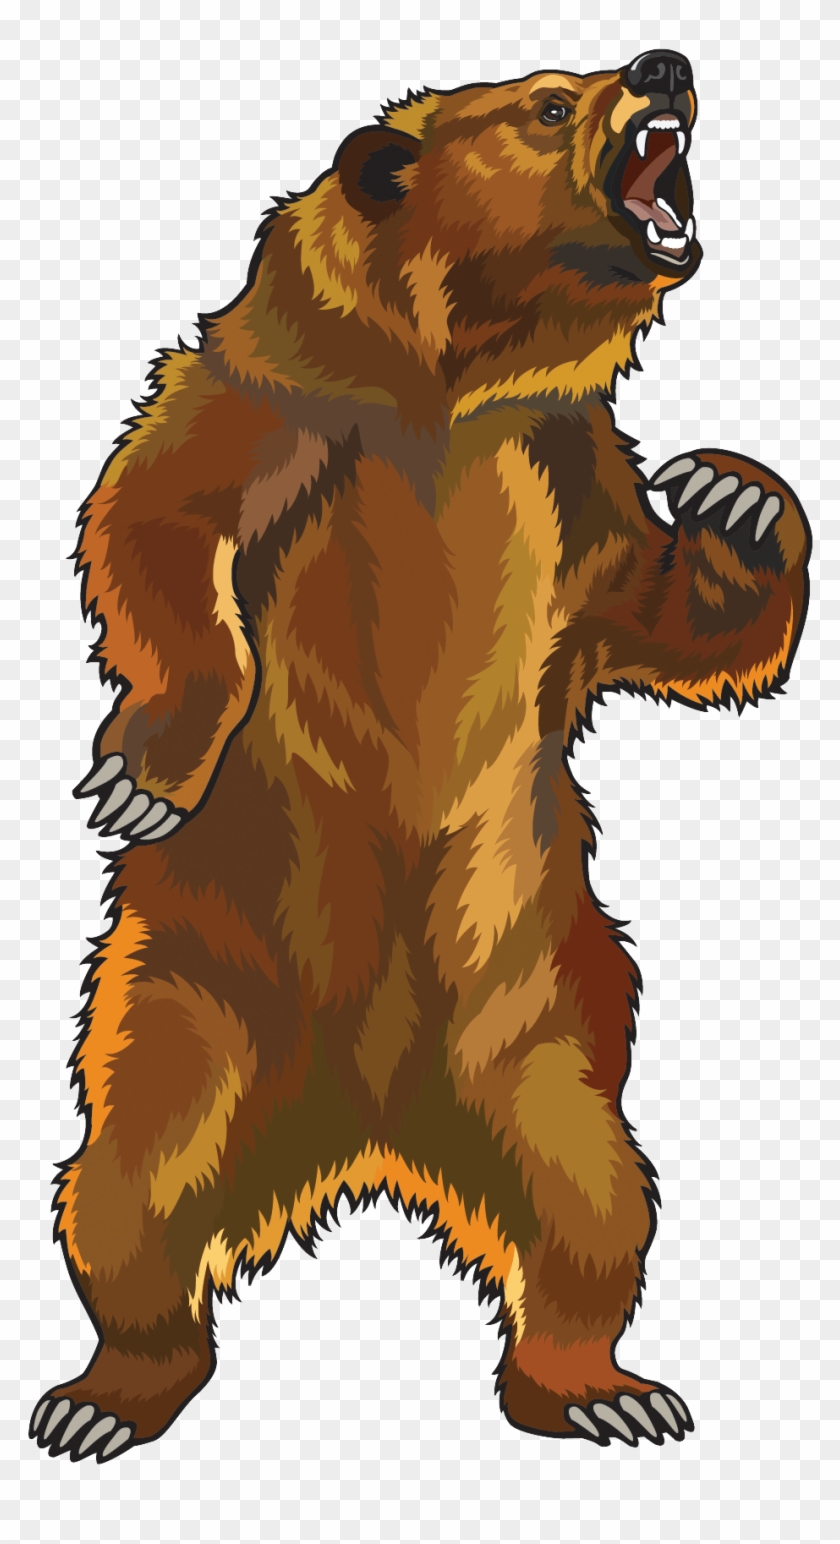 Angry Grizzly Bear - Standing Grizzly Bear Clipart - Png Download #6041127